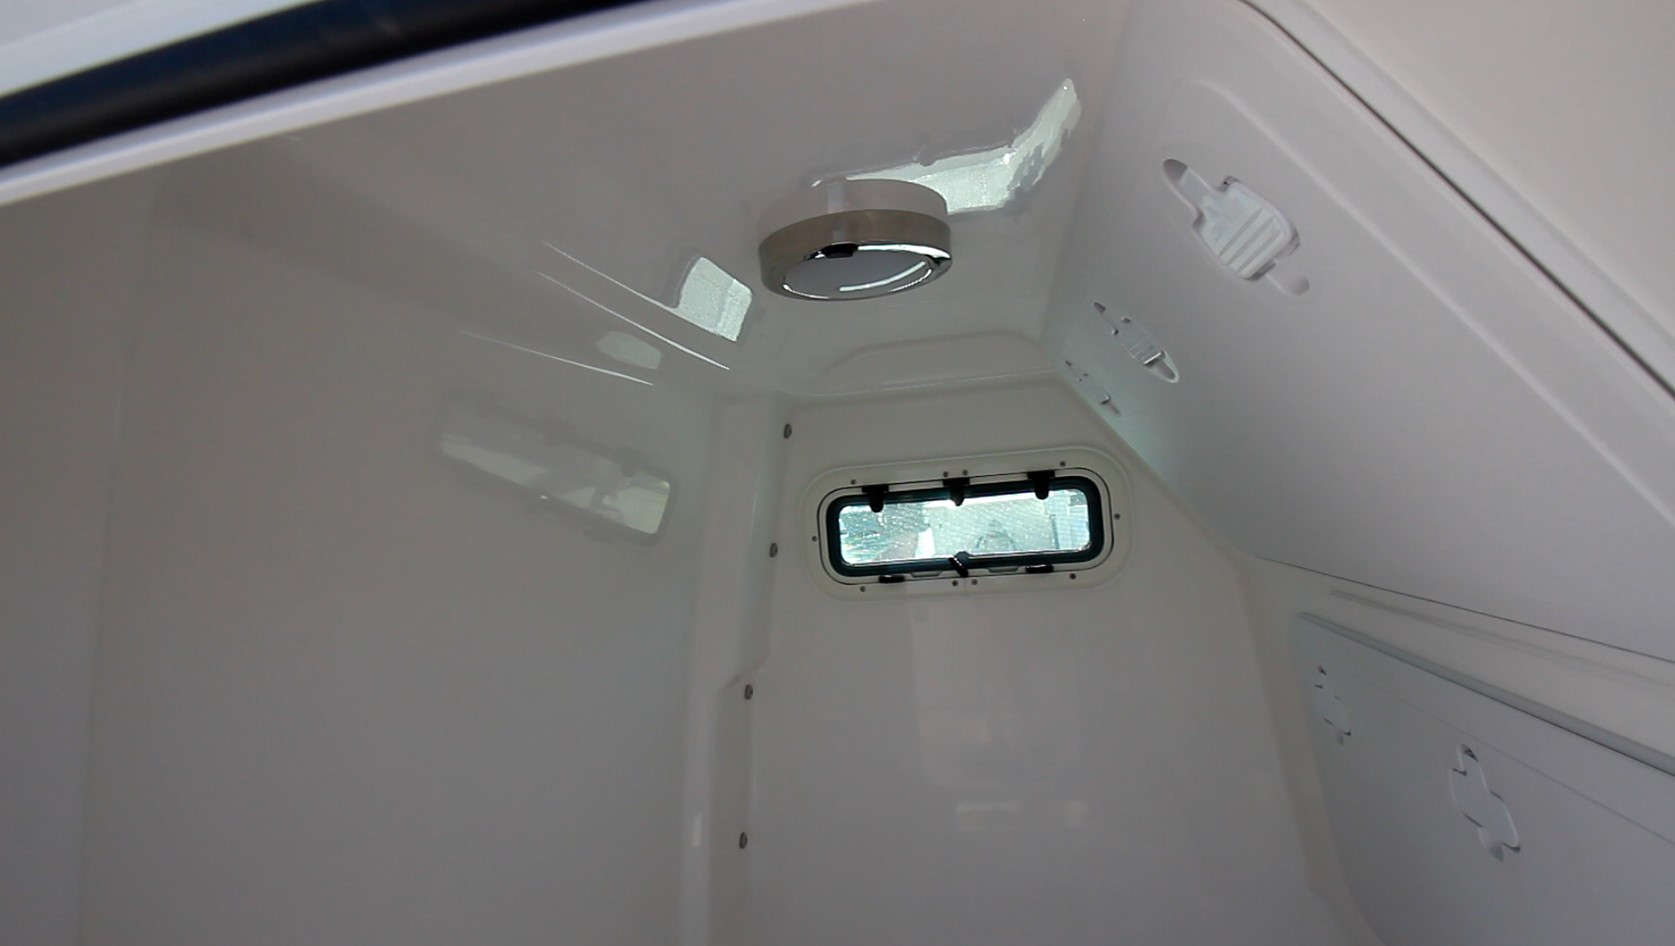 Inside head compartment